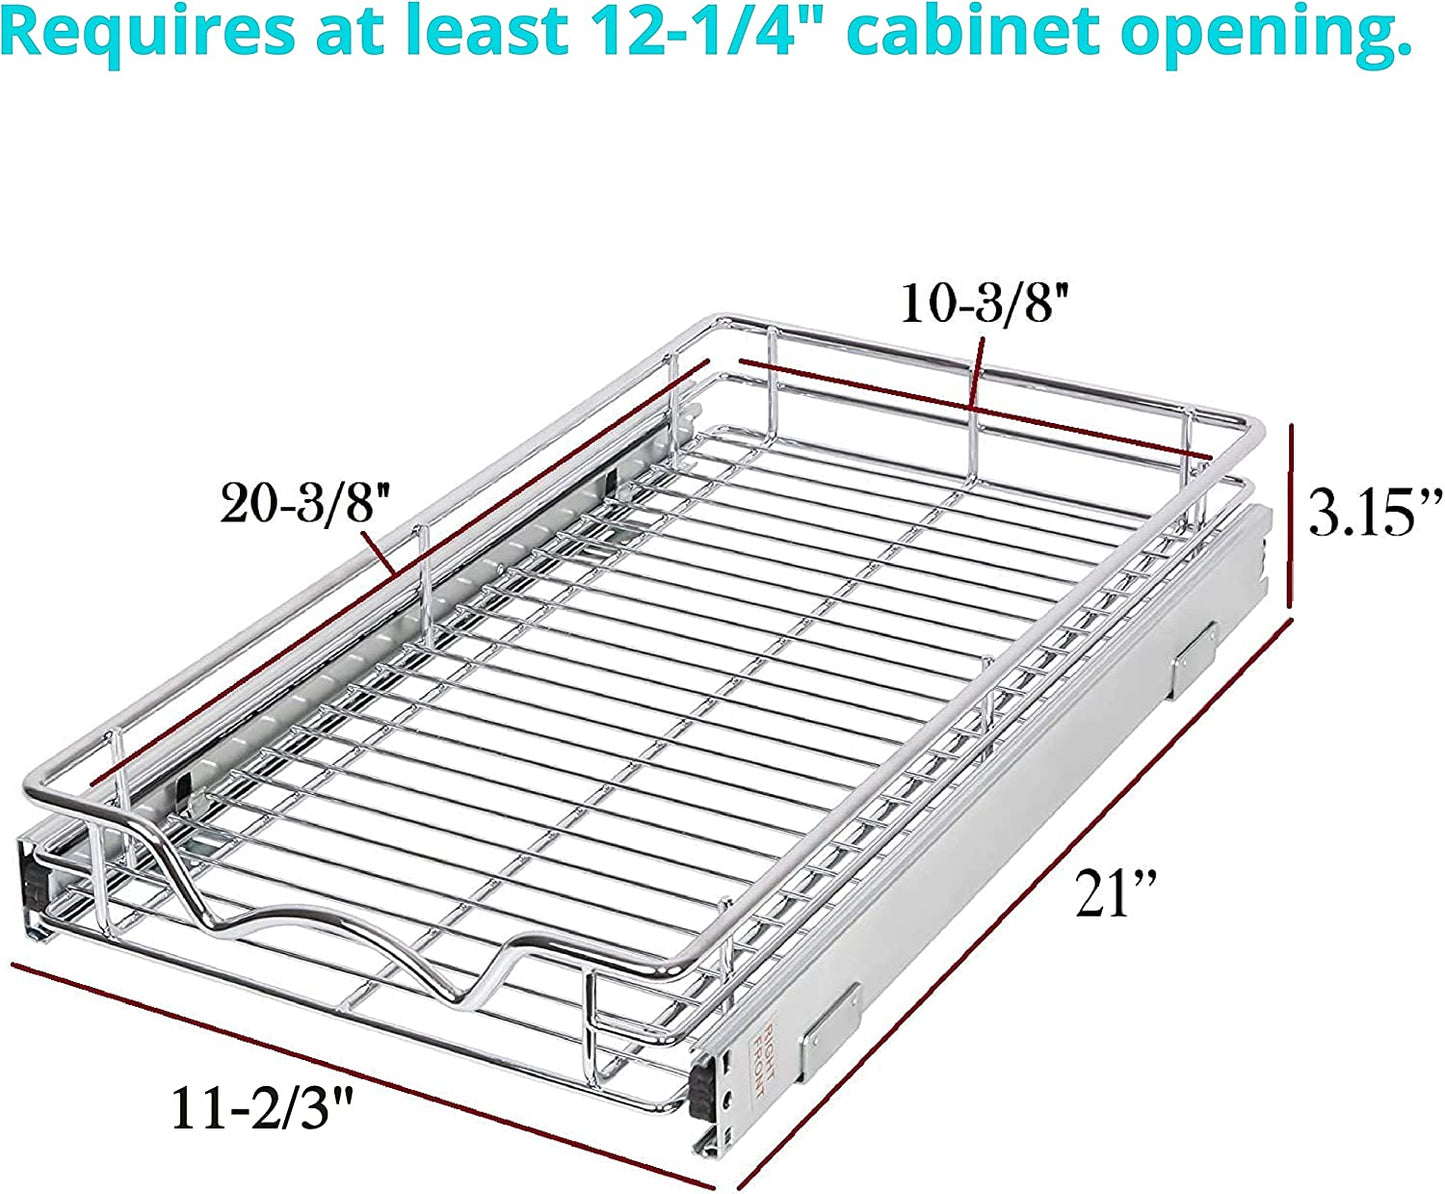 Hold N’ Storage Pull Out Cabinet Drawer Organizer Slide Out Shelves, -11”W x 21”D - Requires At Least a 12-1/4” Cabinet Opening - elpetersondesign